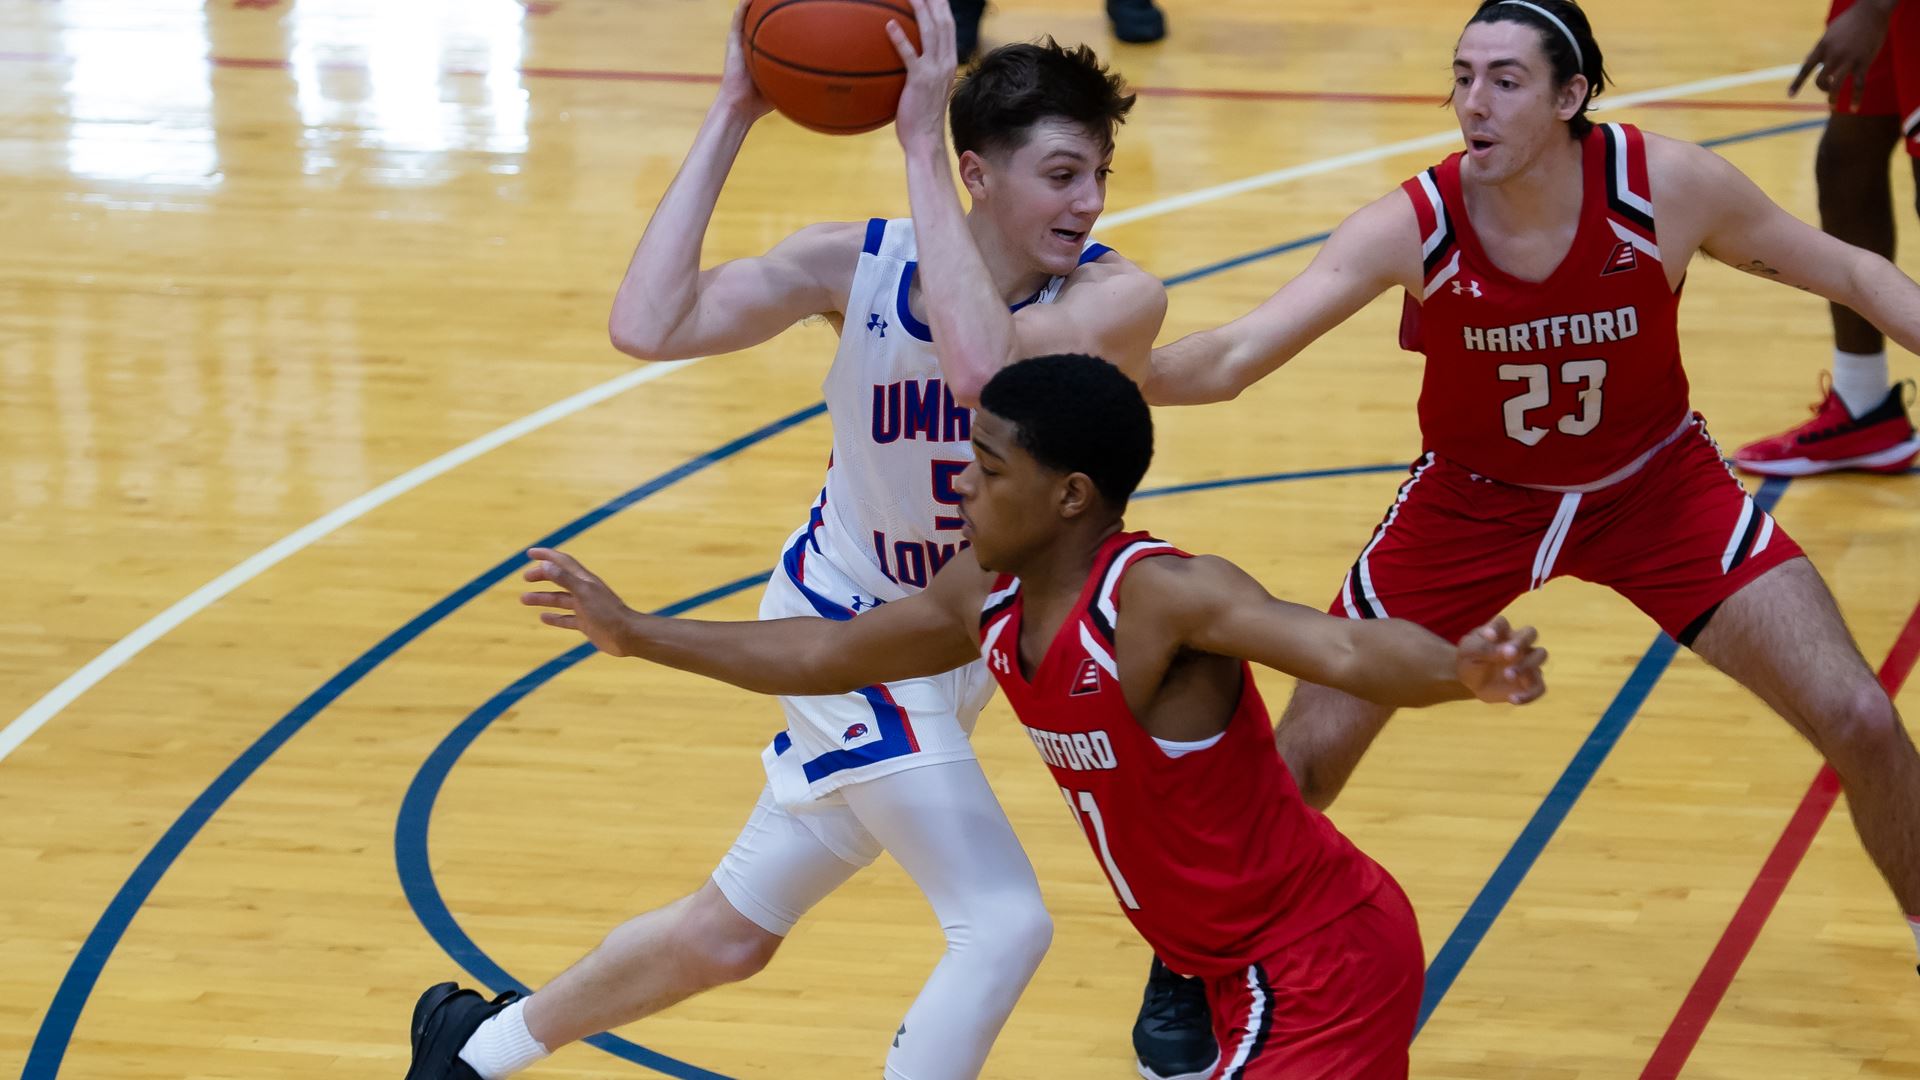 UMass Lowell gets their second win in a row, 71-62 over Hartford